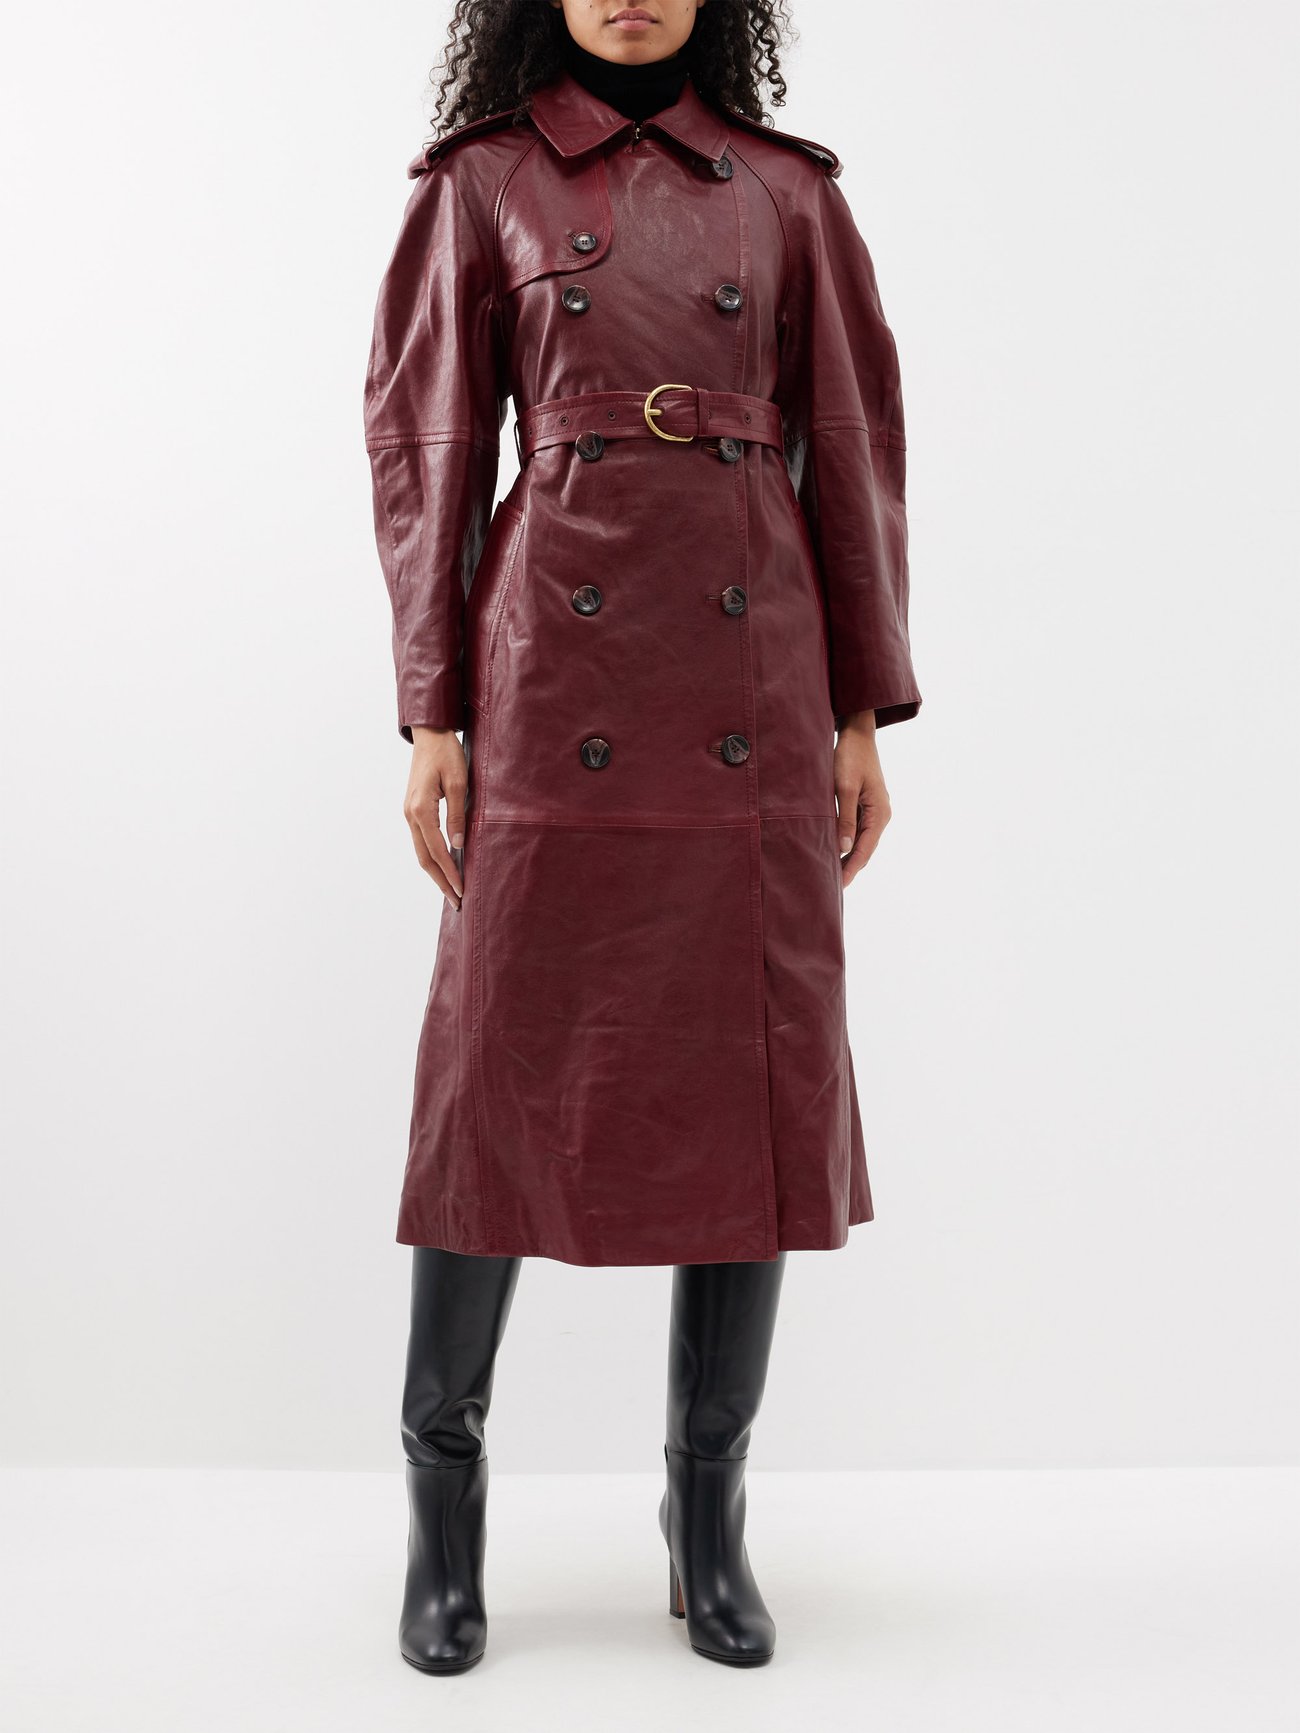 Belle Du Jour' 100% Leather Trench Coat In Rosso, Santinni